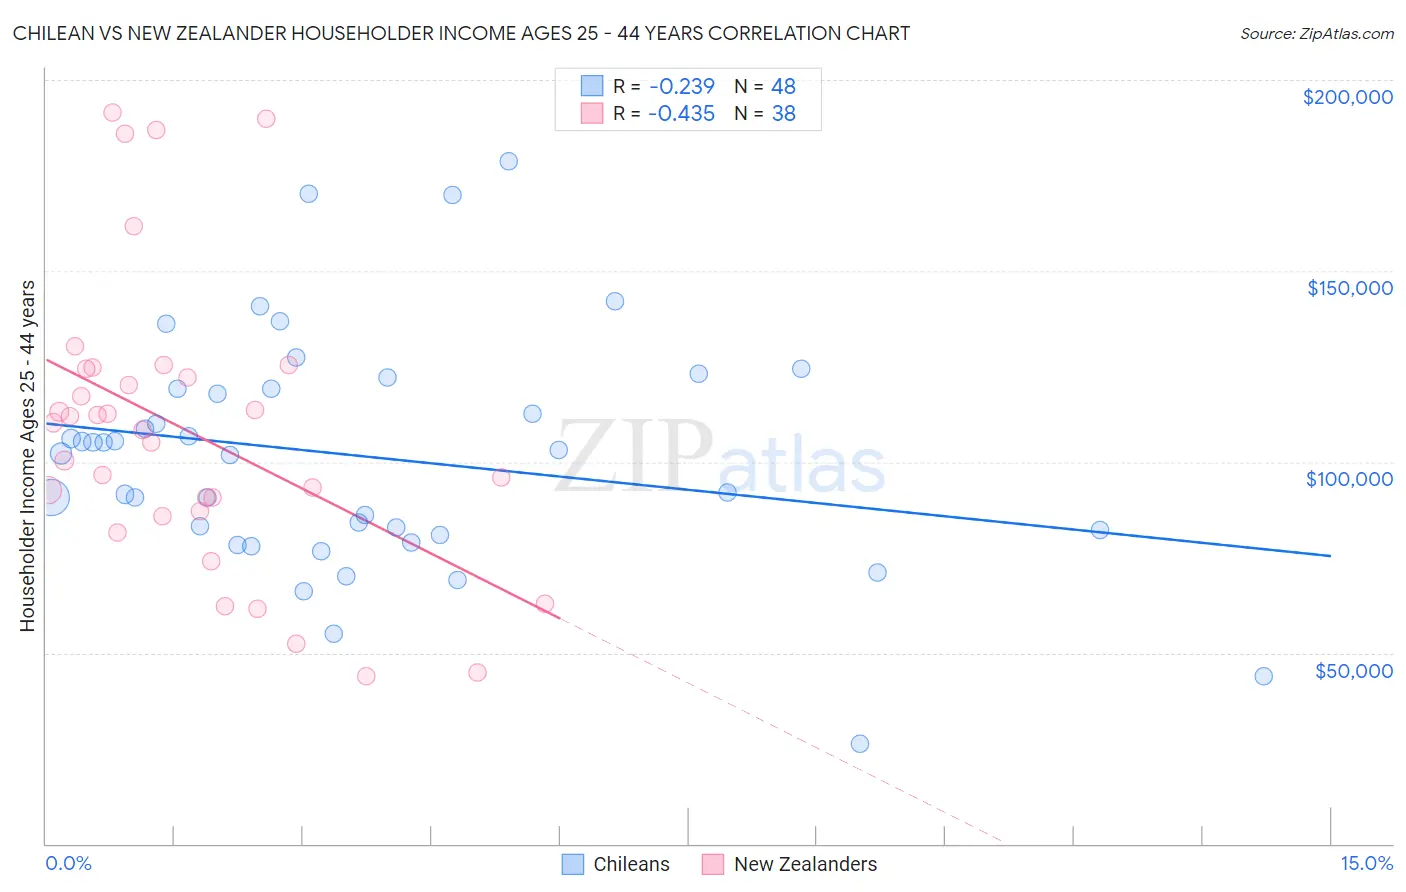 Chilean vs New Zealander Householder Income Ages 25 - 44 years